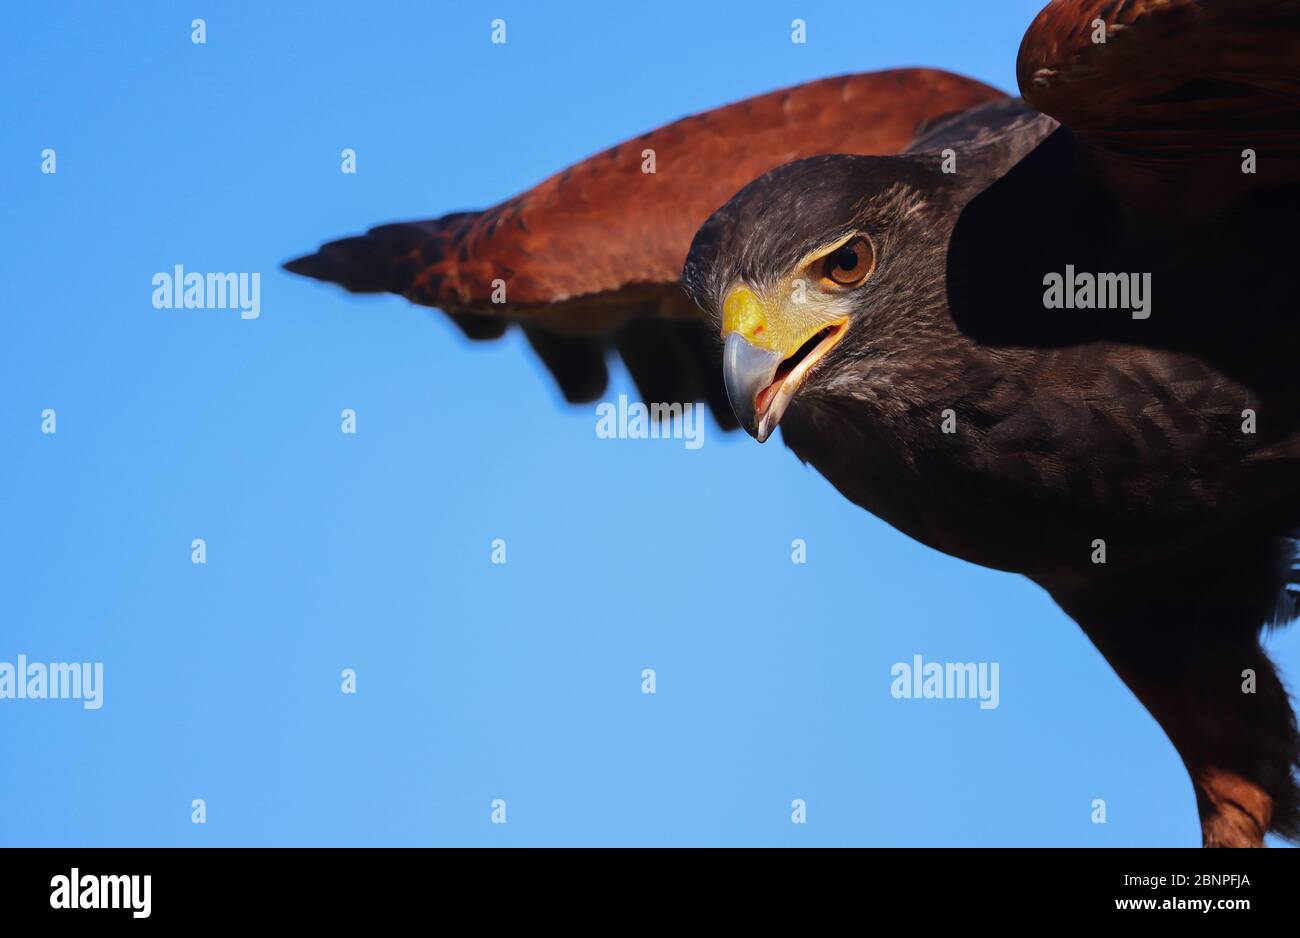 Close up of a Harris's Hawk that is about to fly, wing extended; dark brown with chestnut shoulders, intense eye, blue sky. Copy space. Fills1/2 frame Stock Photo